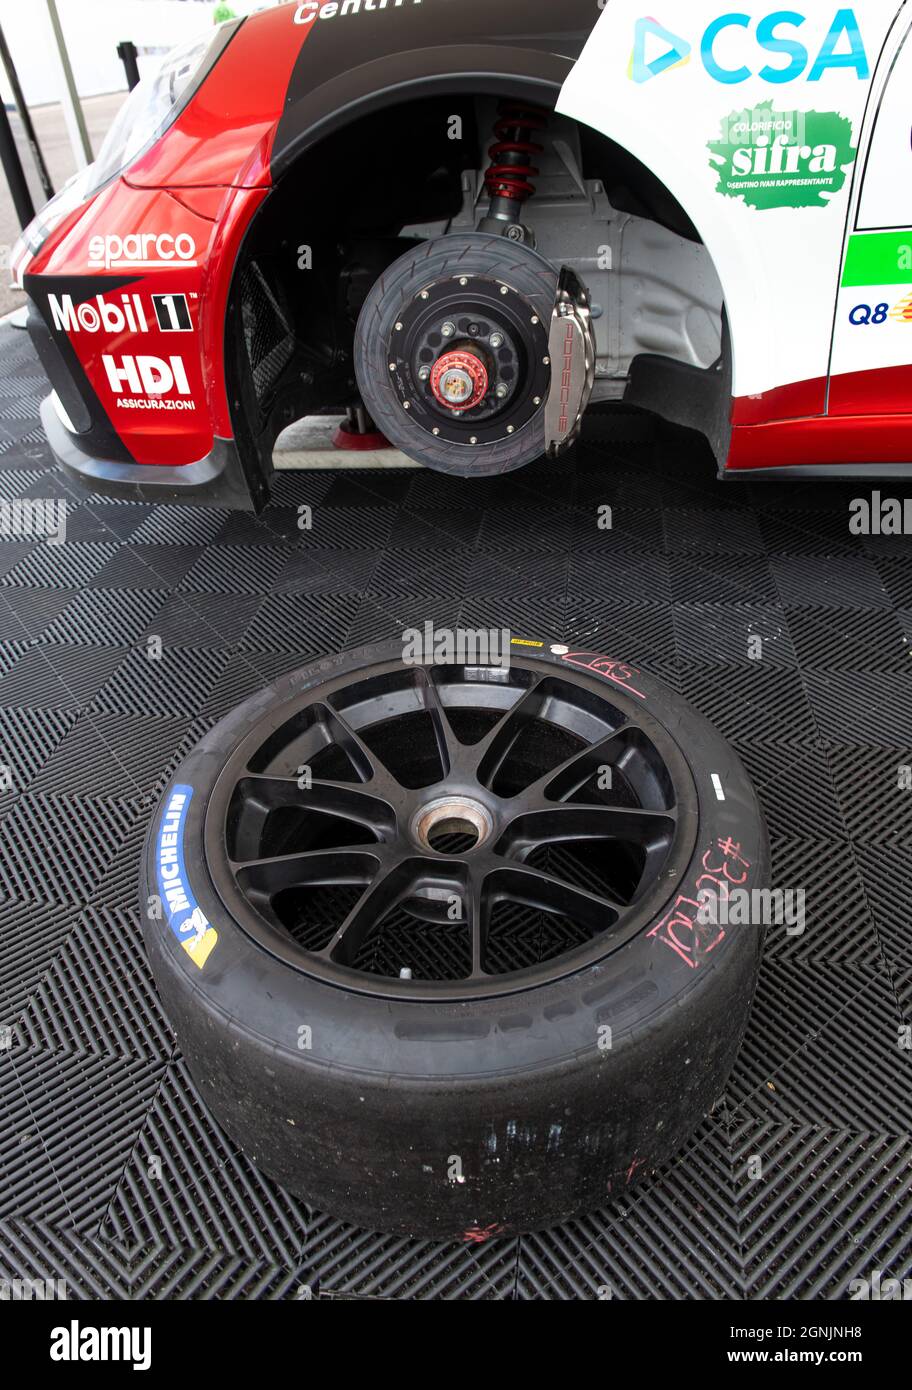 Vallelunga, italy september 19th 2021 Aci racing weekend. Unmounted Michelin tire on race car Porsche visible brake mechanical part calliper and disc Stock Photo